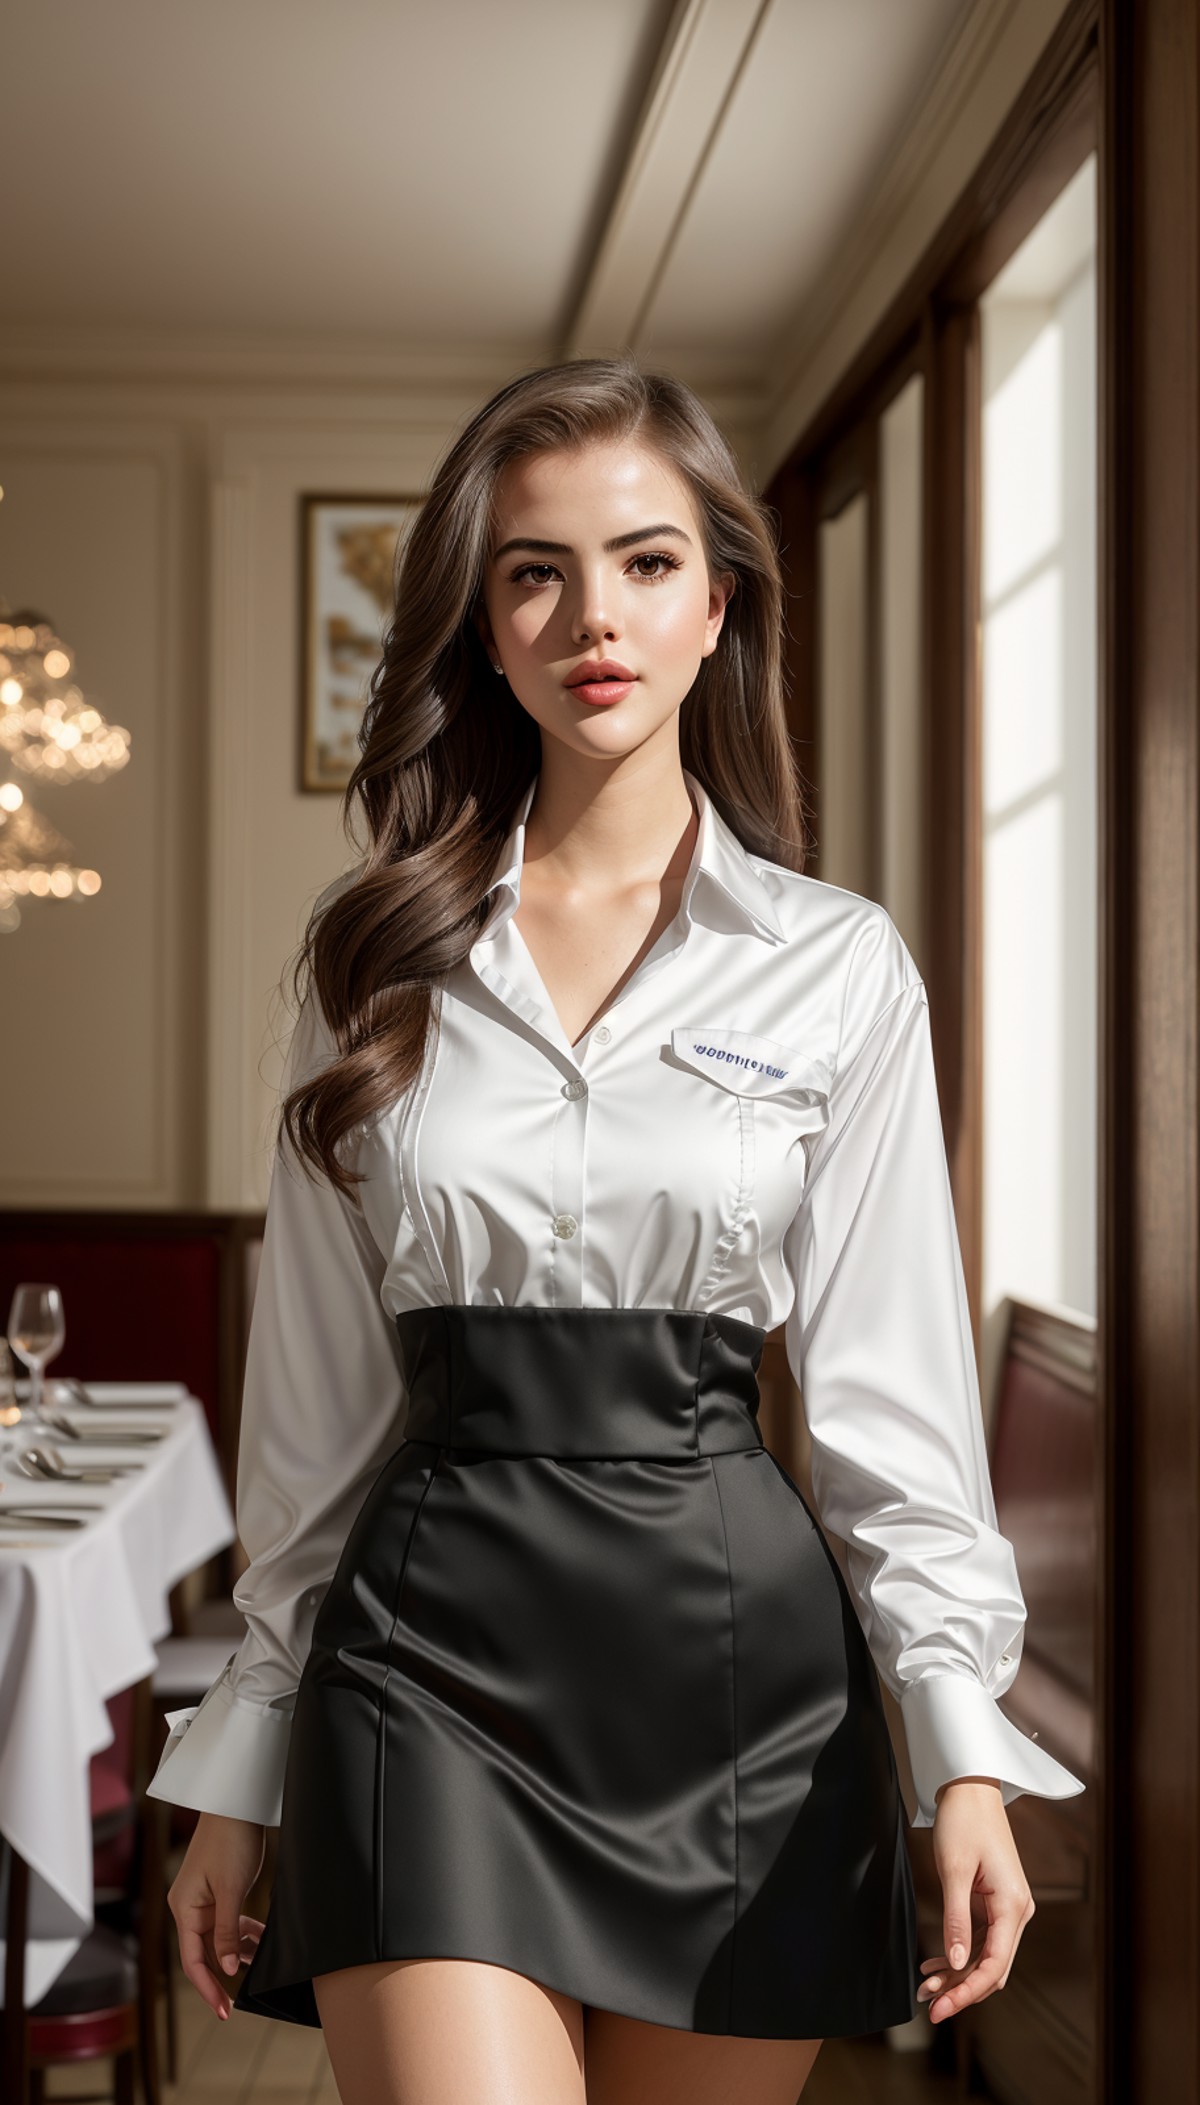 photo of (4l3xbotez:0.99), a woman as a waitress, (((walking in a fancy french restaurant))), modelshoot style, (extremely...